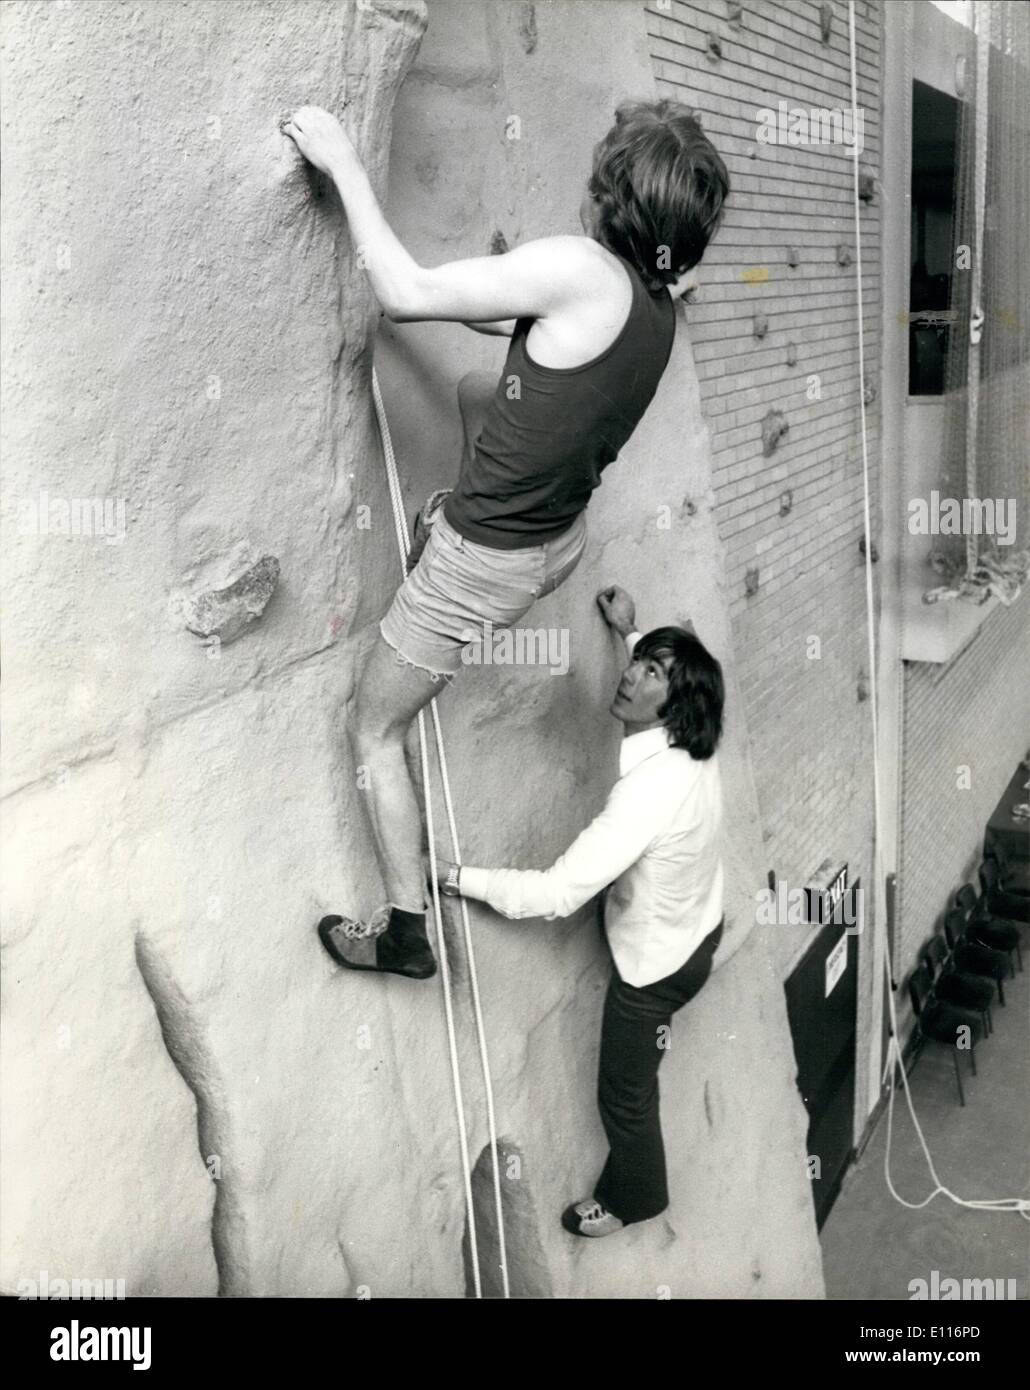 Mar. 03, 1976 - Everest Climber inaugurates new climbing wall at the Sobell Sports Centre: A new climbing wall was inaugurated at the Sobell Centre, Hornsey Road, London, .7 today by Everest climber, Peter Boardman. Introducing climbing walls into urban Sports cabtres is an attempt to inspire those who live in Central London with an interest they can pursue outside london. The climbing wall at the Sobell sports centre is 30 ft high.Photo shows Two of the young climbers seen near the top of the 30 ft wall followed by Everset climber Peter Boardman. Stock Photo